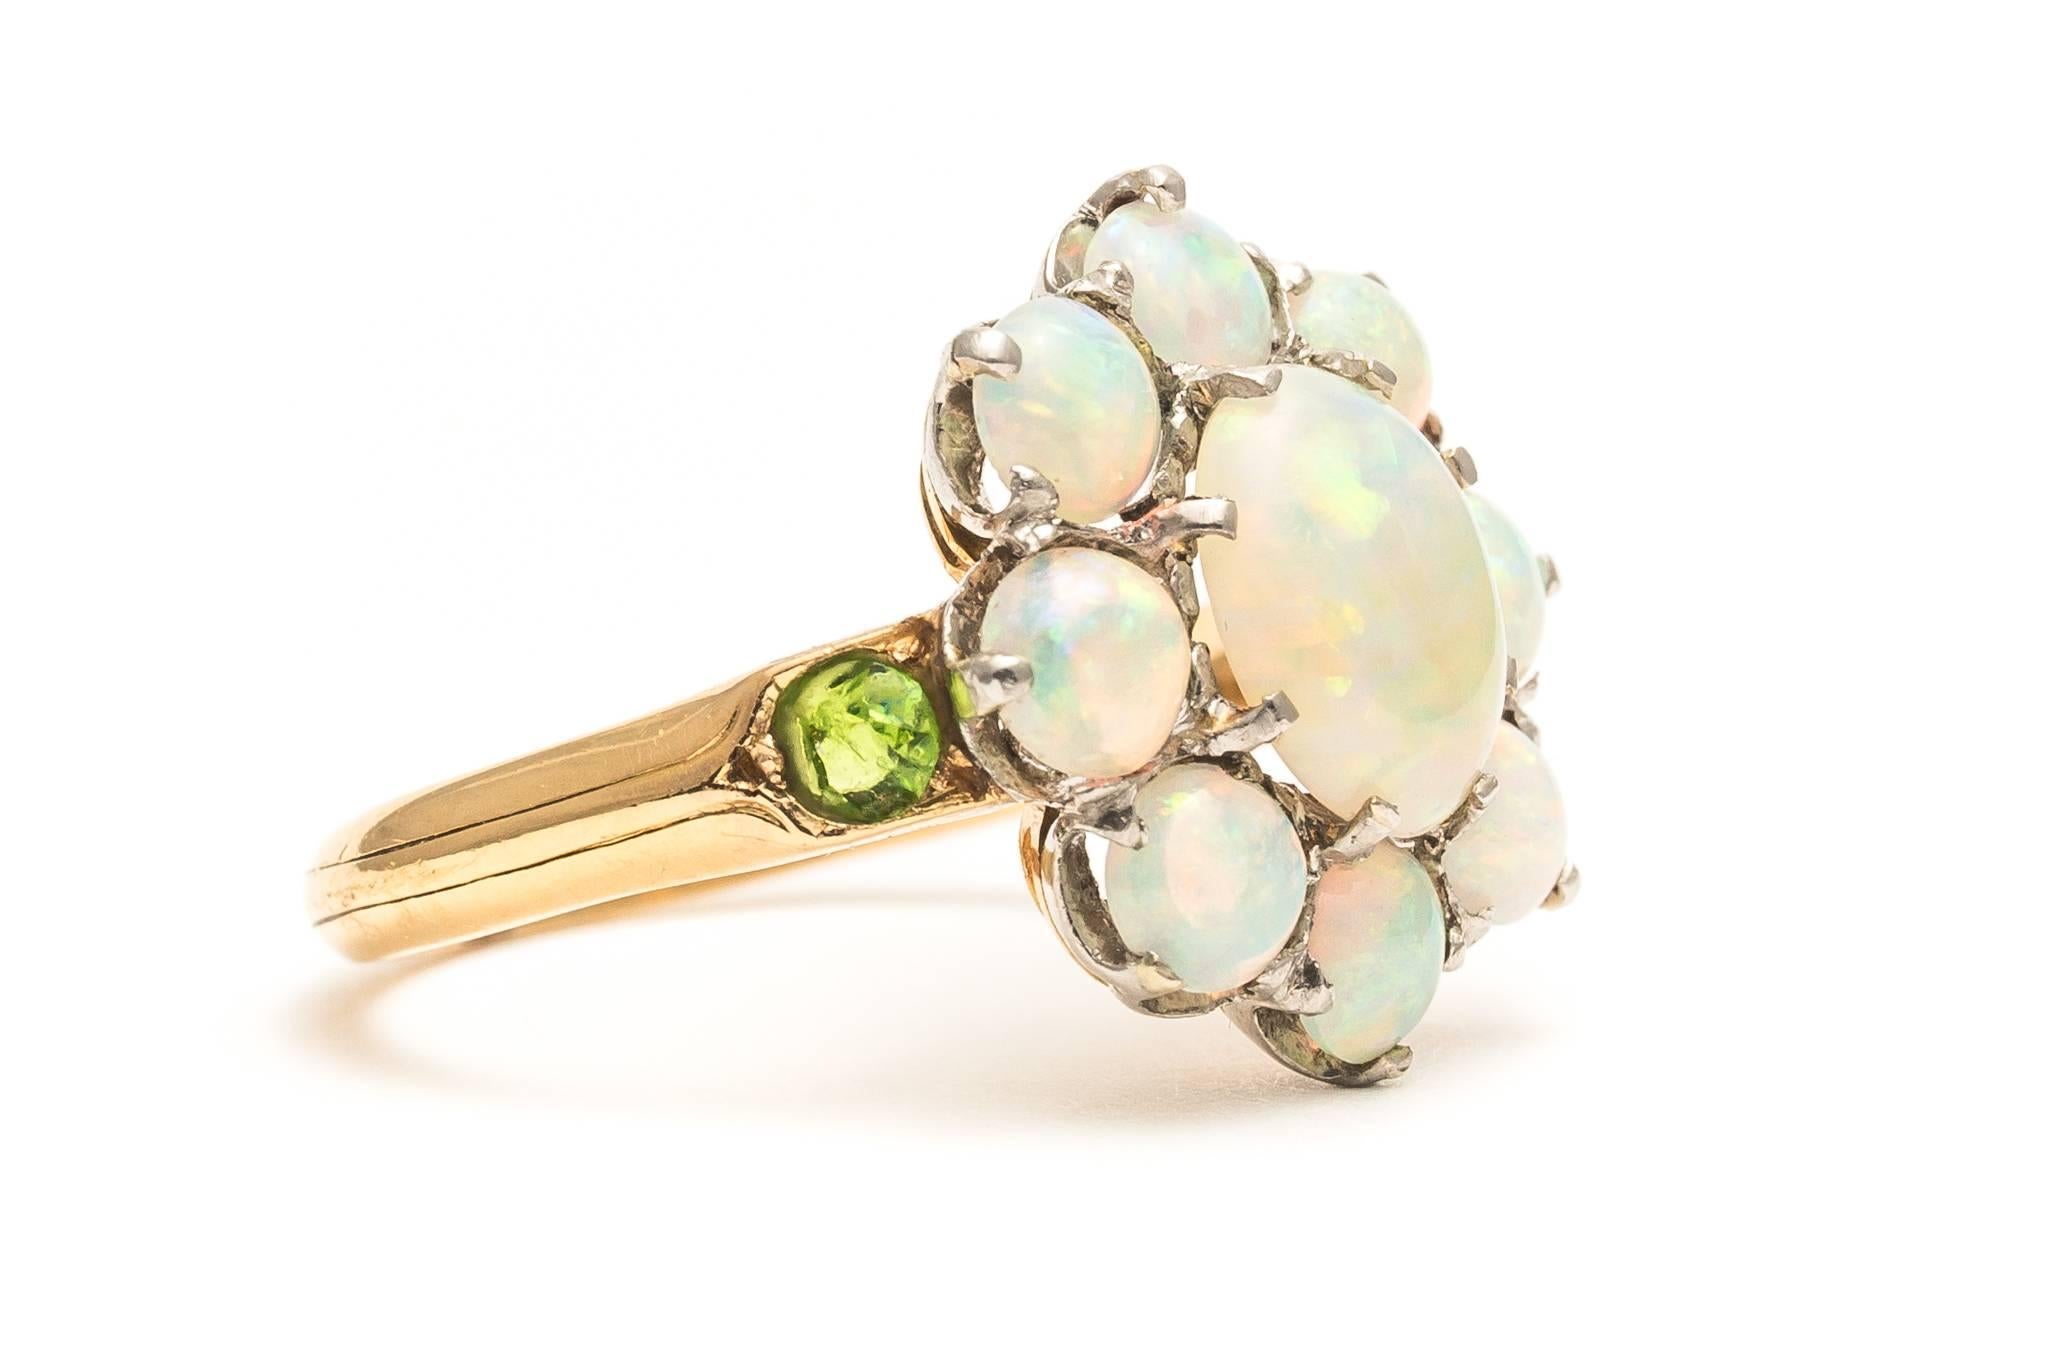 Beacon Hill Jewelers Presents:  

An original antique edwardian period opal, and demantoid garnet ring in platinum, and 18 karat yellow gold.  Set with stunning vividly colored lightning ridge opals who's color we cannot even being to capture in